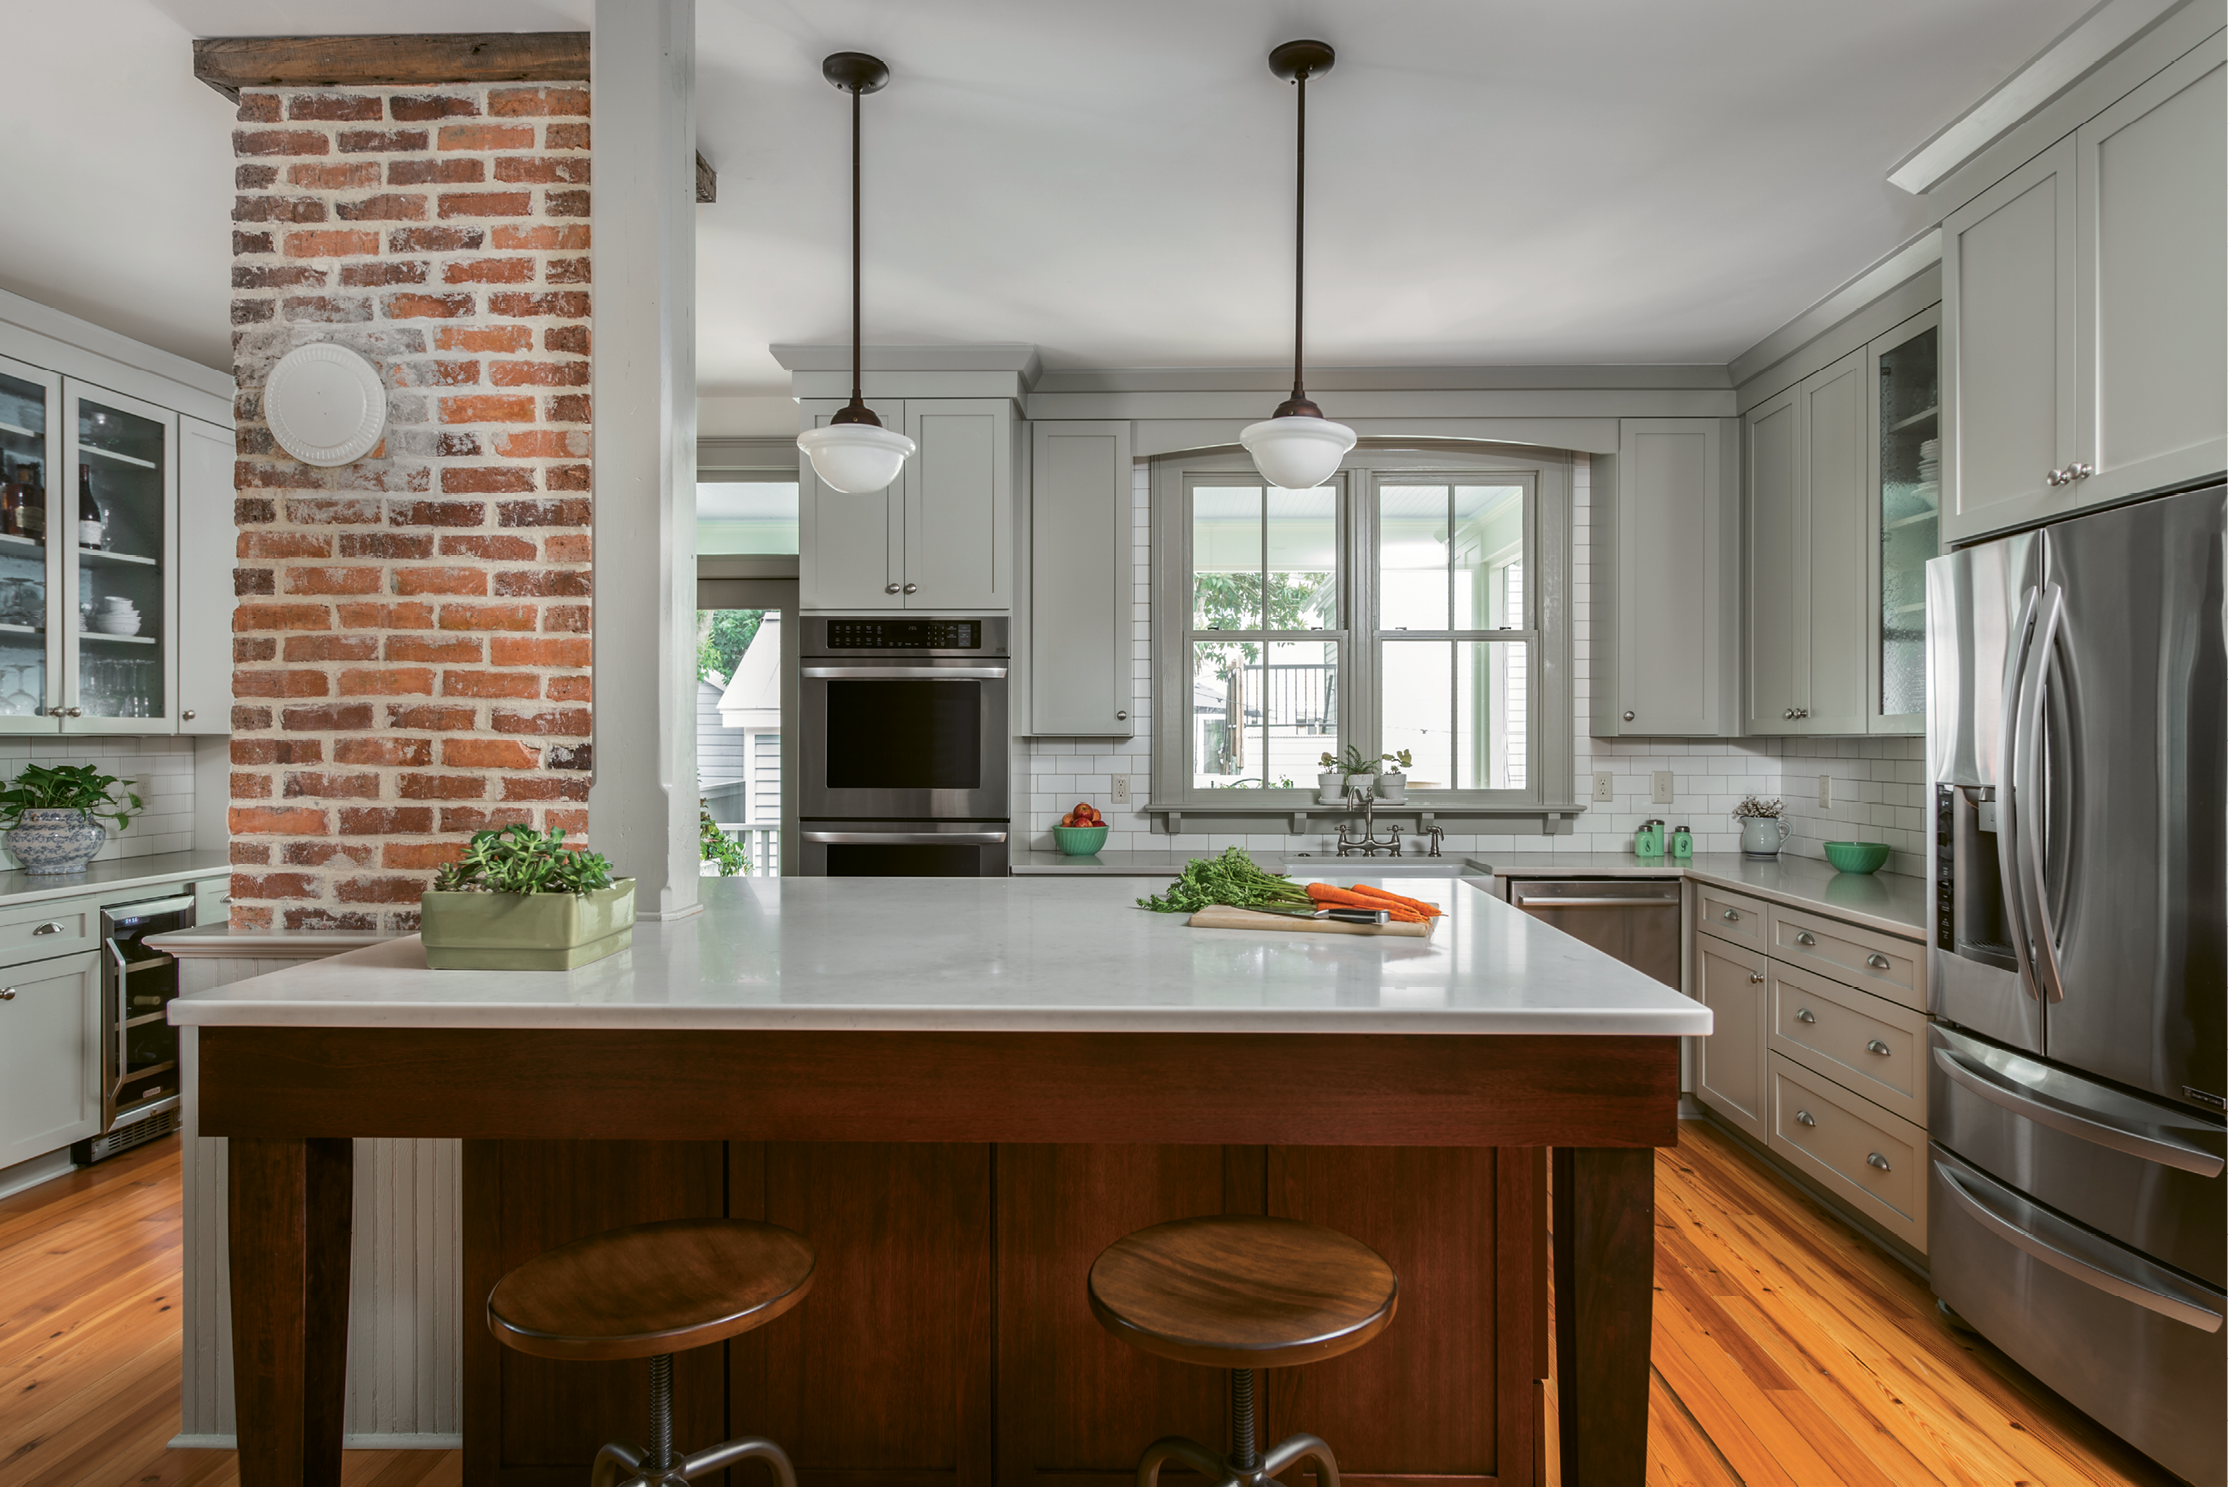 In the kitchen, Engelke repurposed an antique porch column to provide necessary structural support. Most evenings, the Ellsworths can be found here, eating dinner or just hanging out at the quartz-topped island.